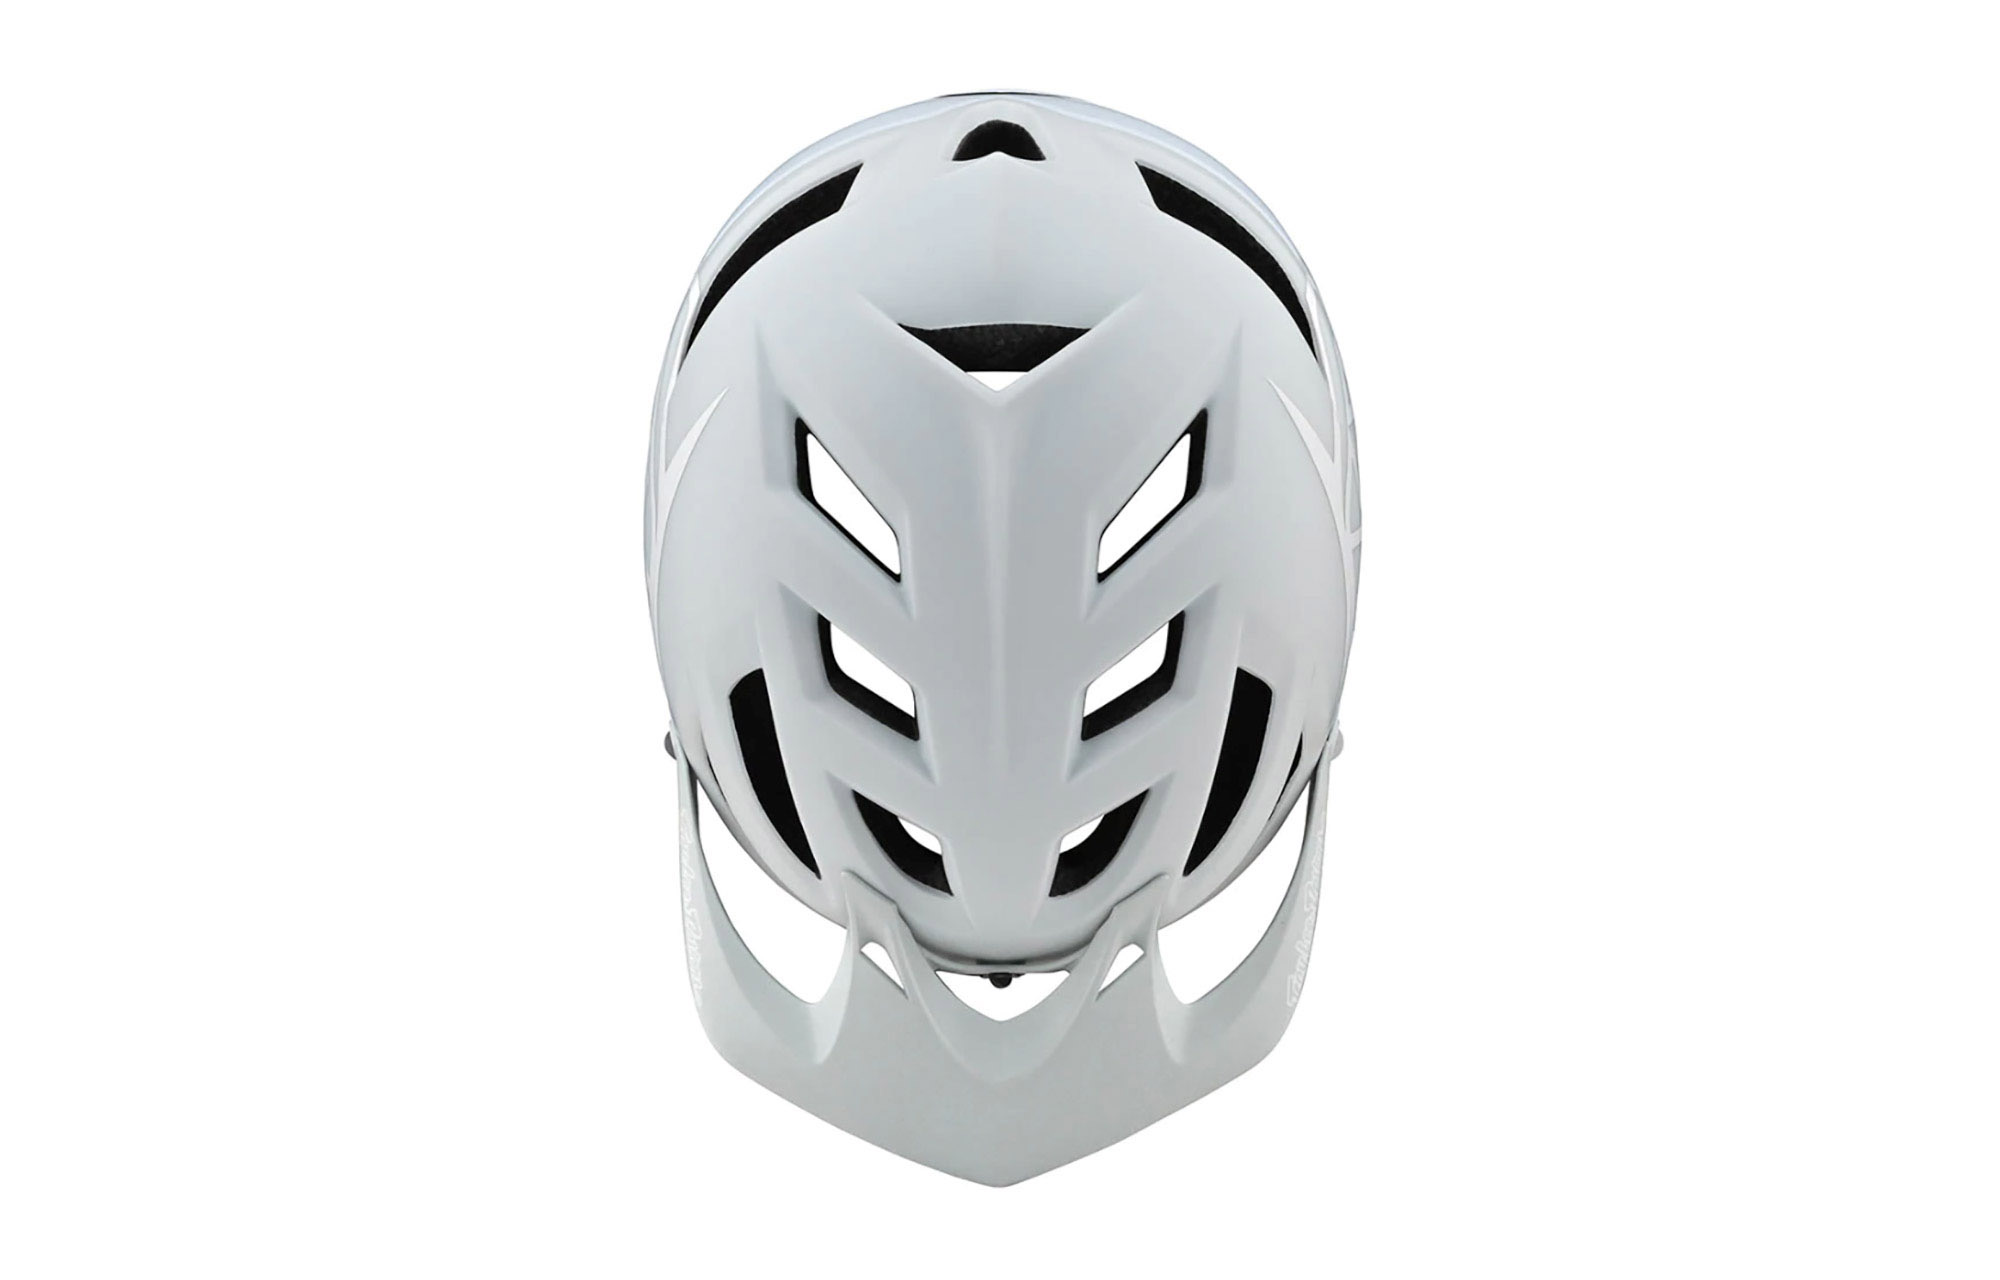 TROY LEE DESIGNS A1 MIPS HELMET - CLASSIC GREY/WHITE image number 1